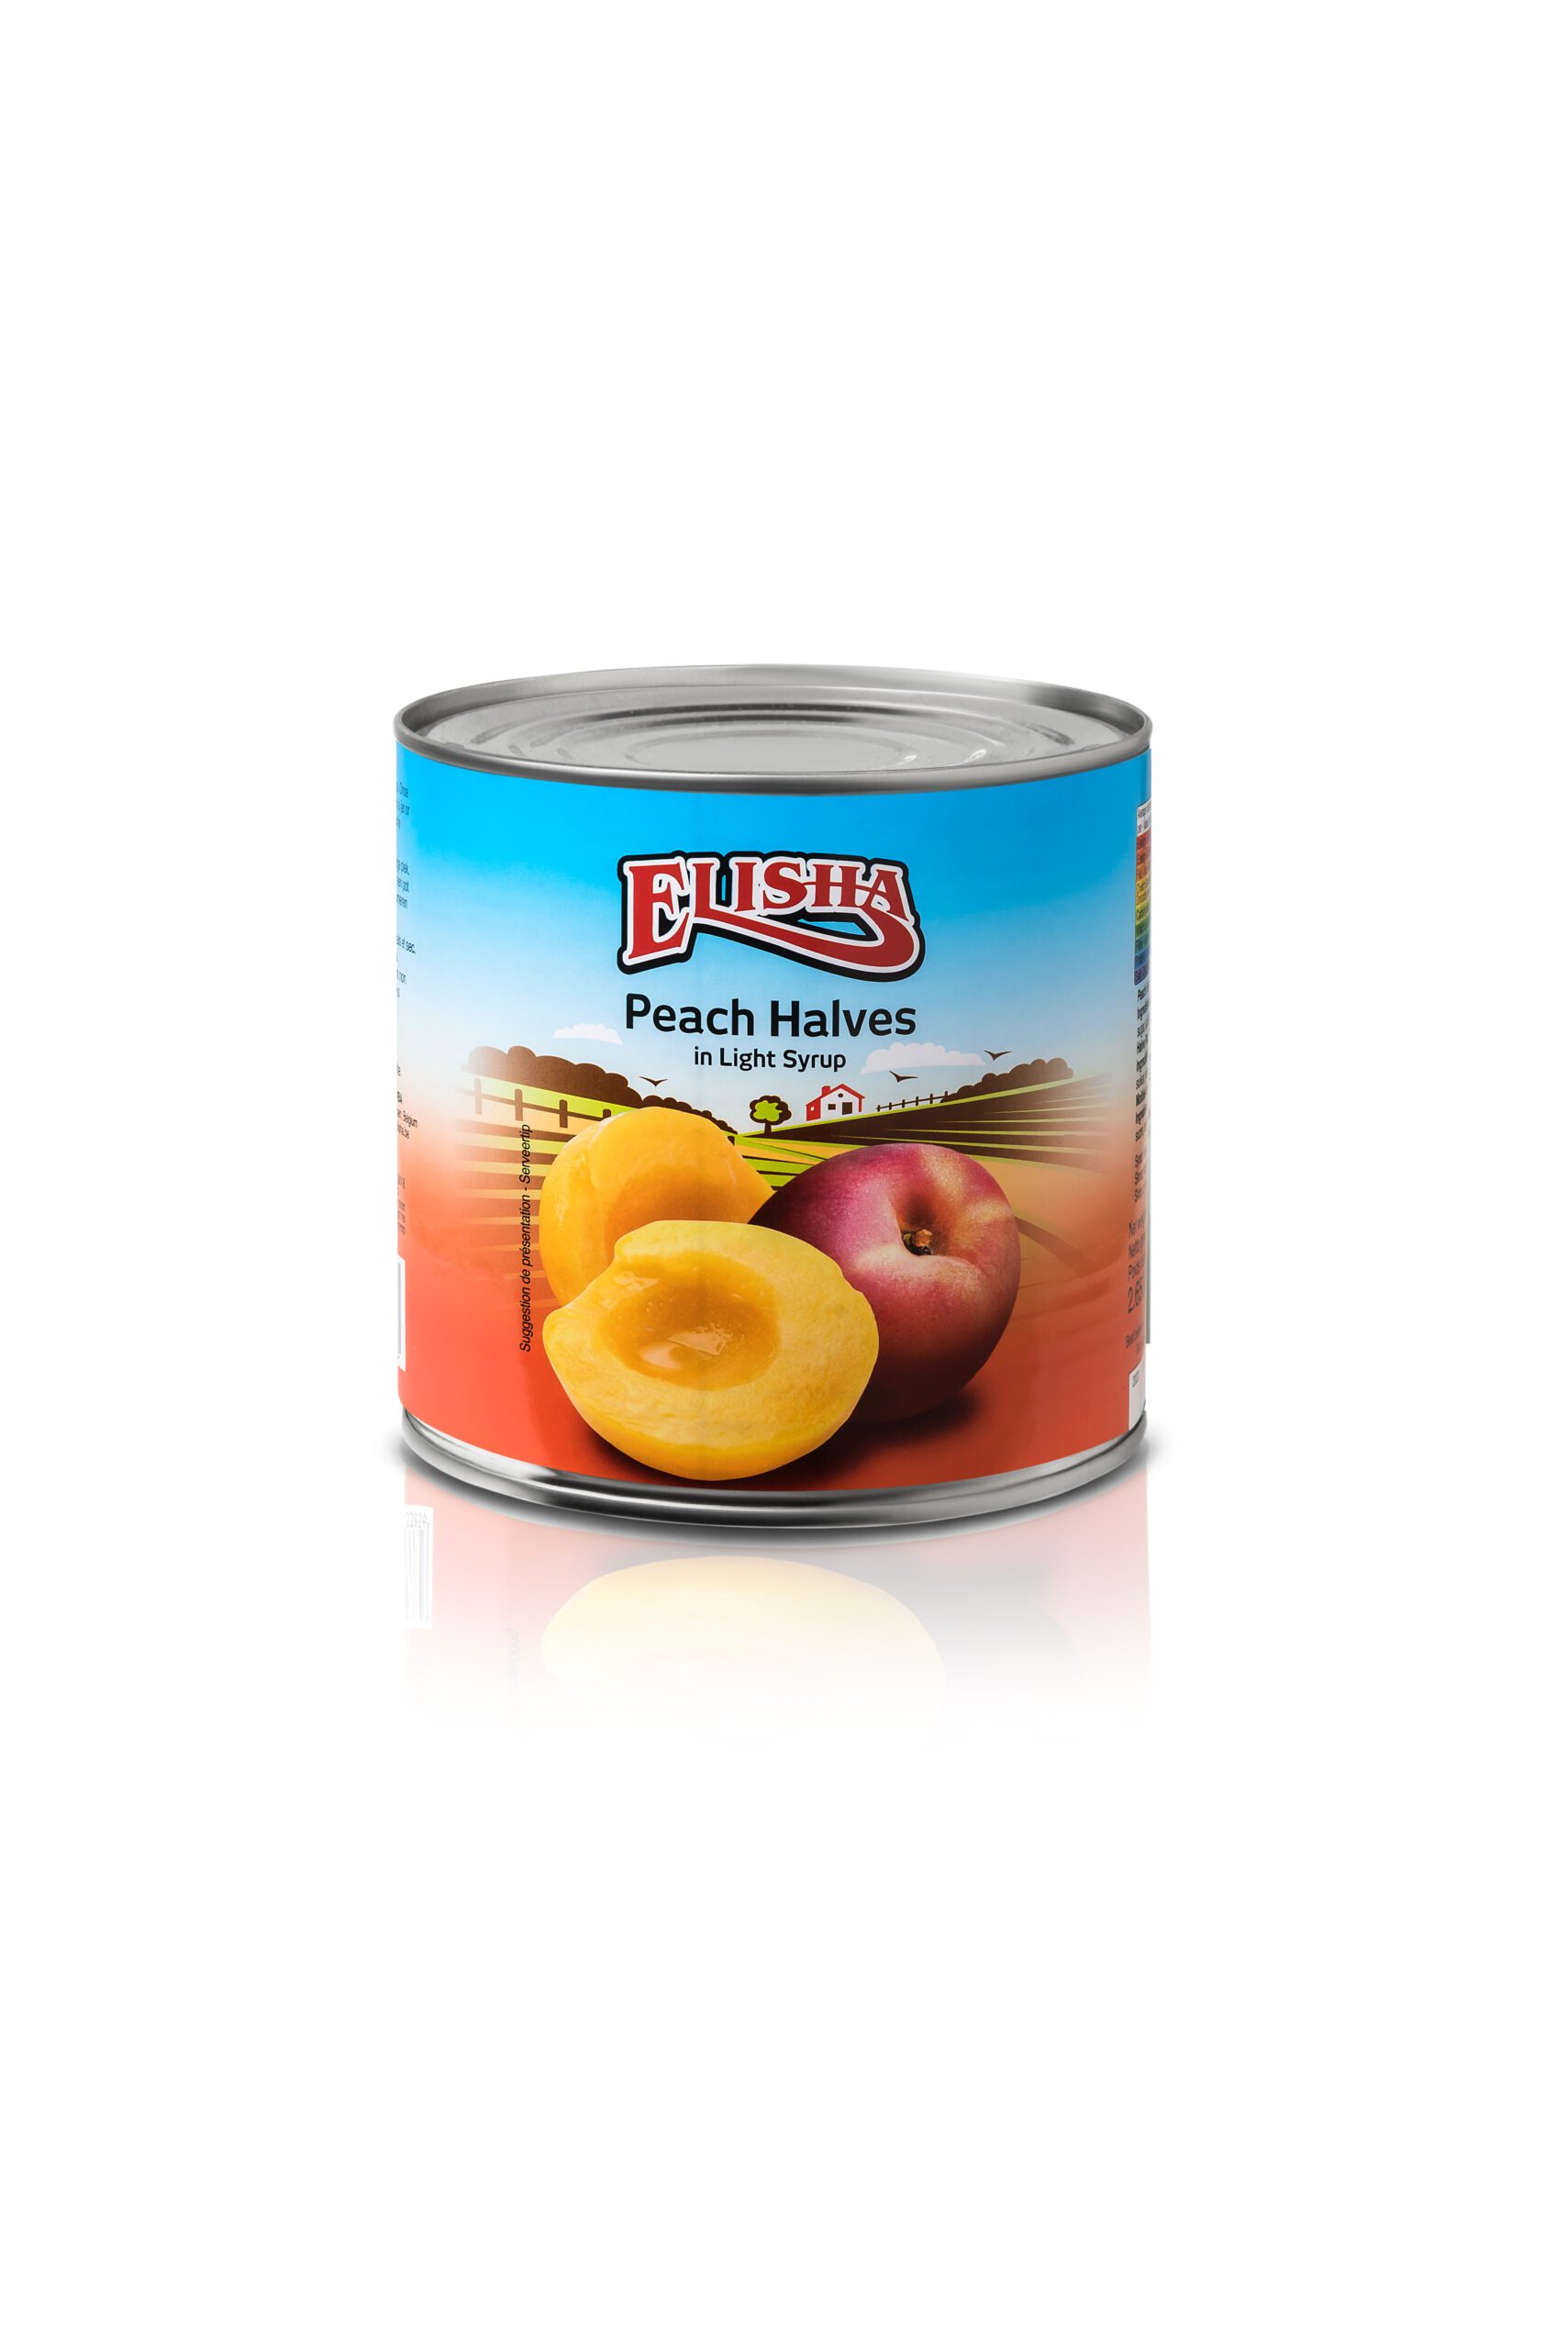 ELISHA PEACH HALVES IN LIGHT SYRUP [CATERING]